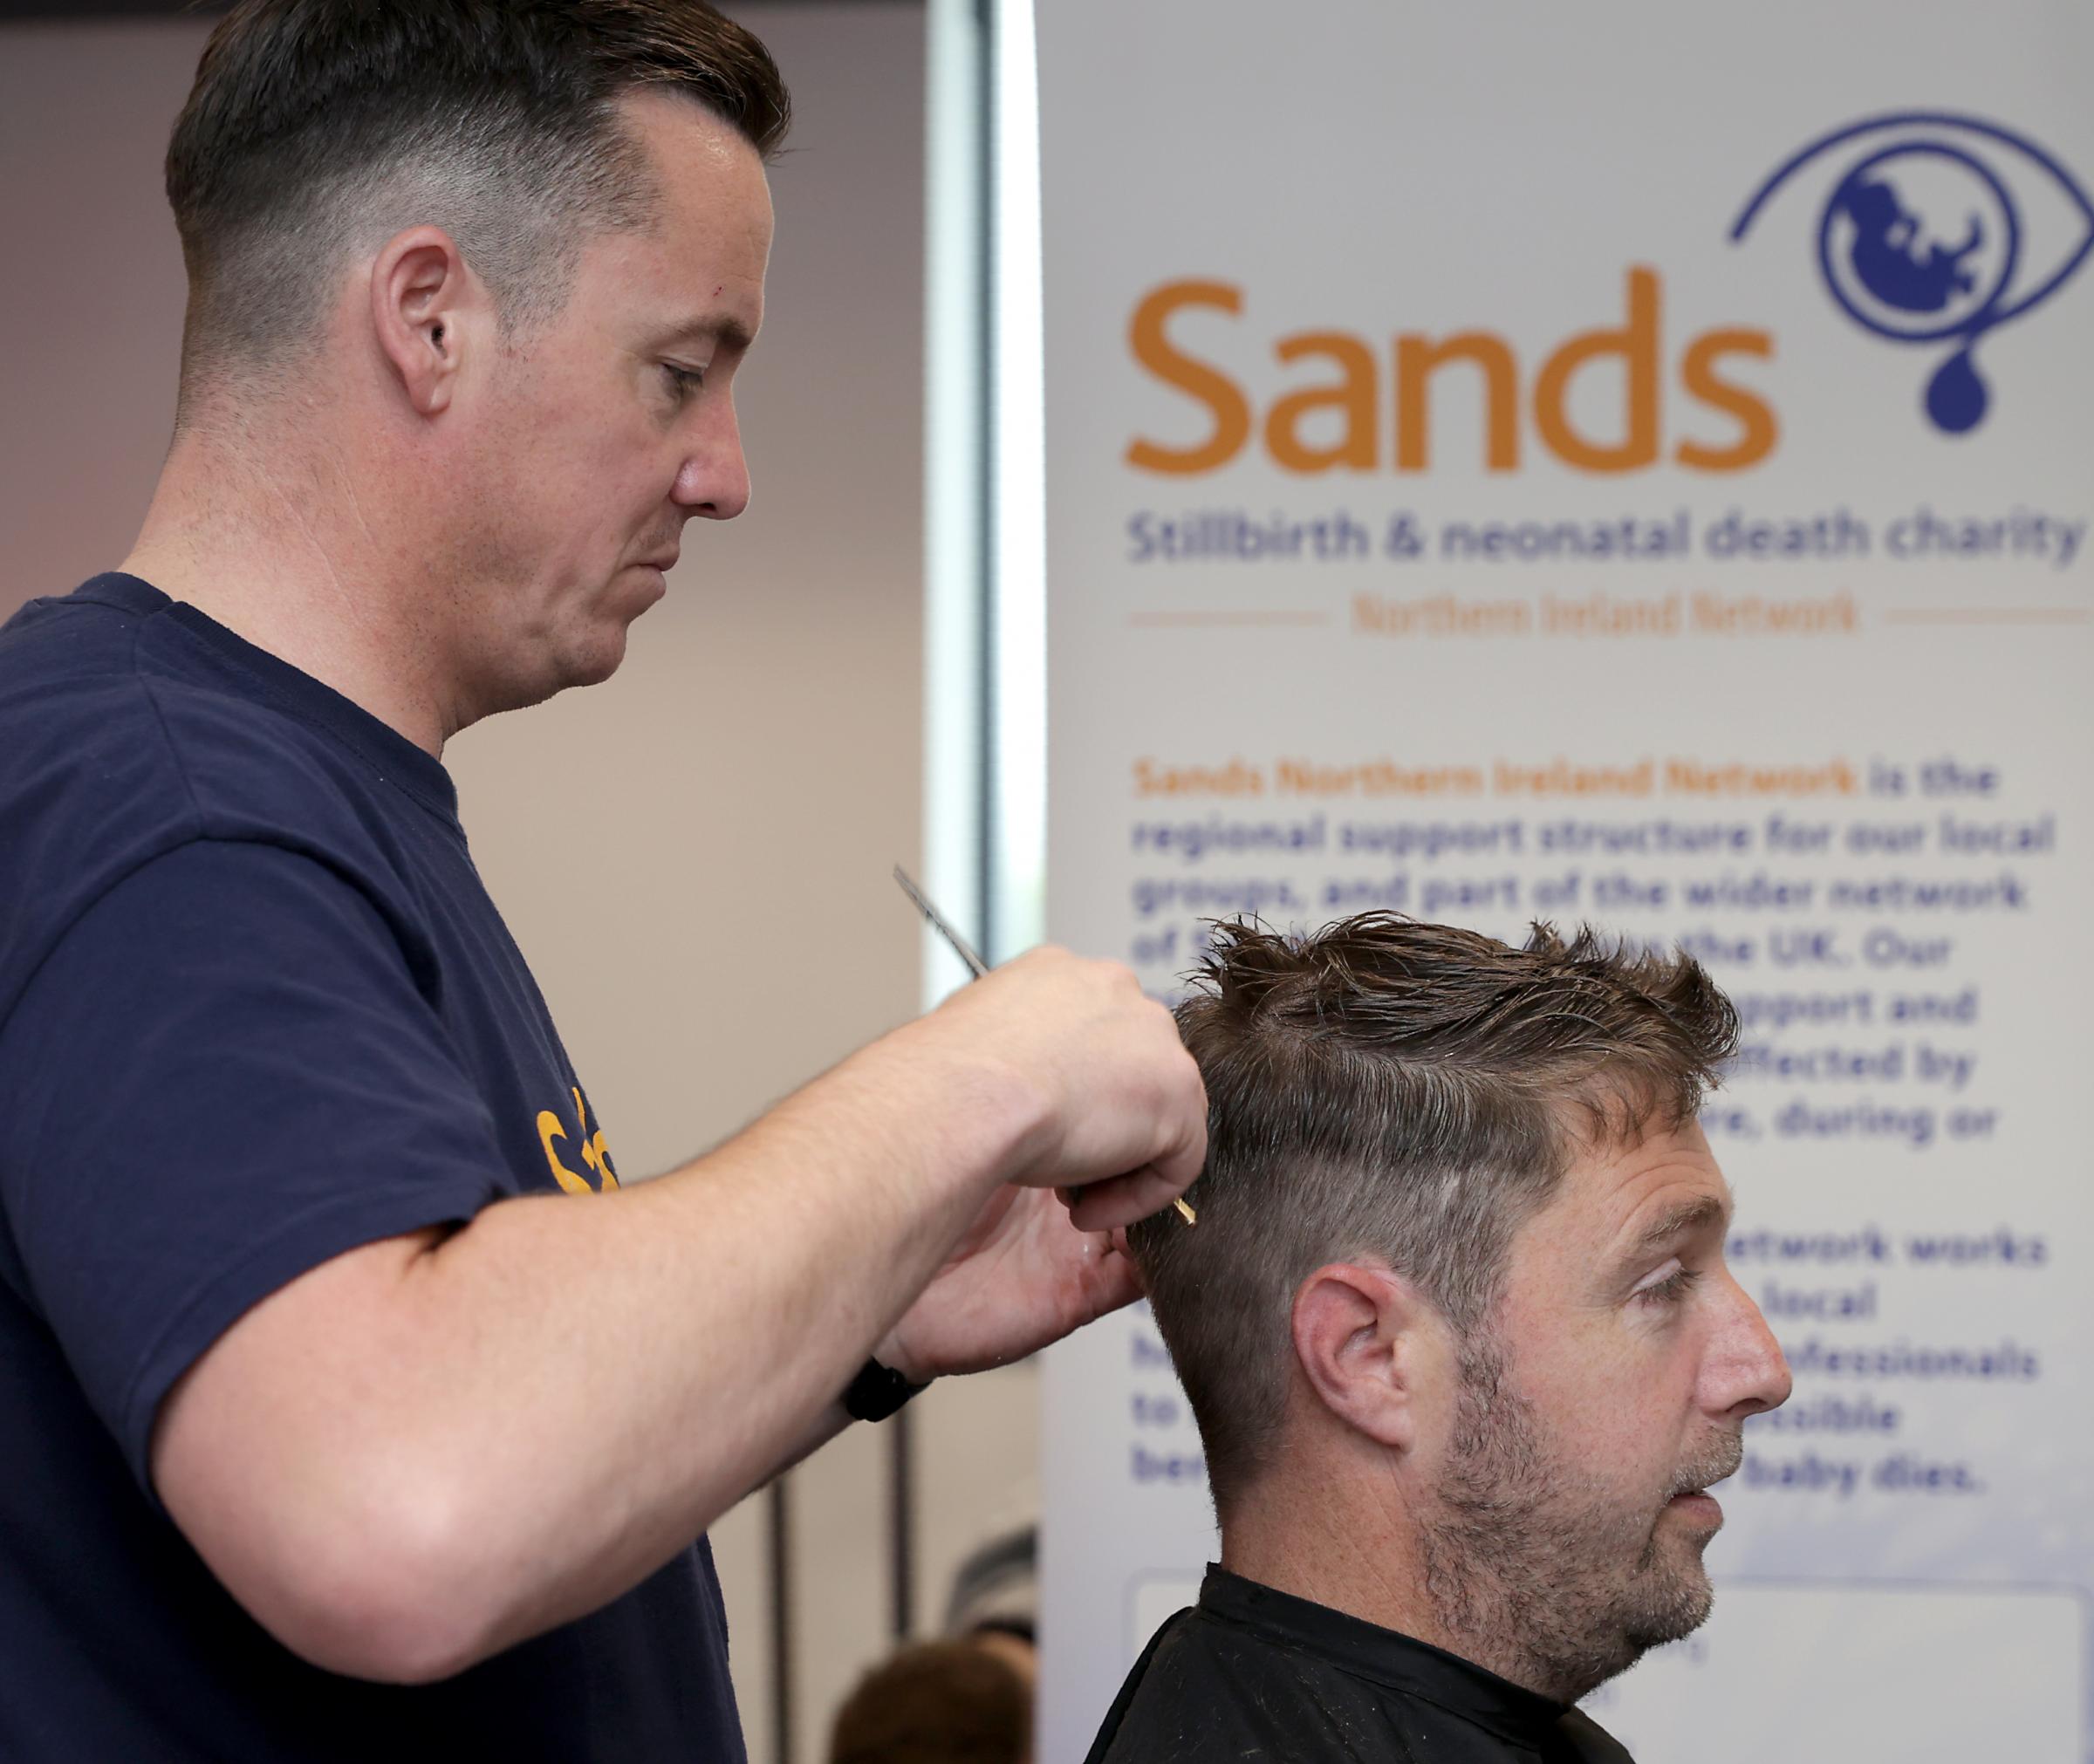 Gareth Kennedy, getting a full head haire cut from Sean Merrett, Barber, during the fundraising event at South West College.